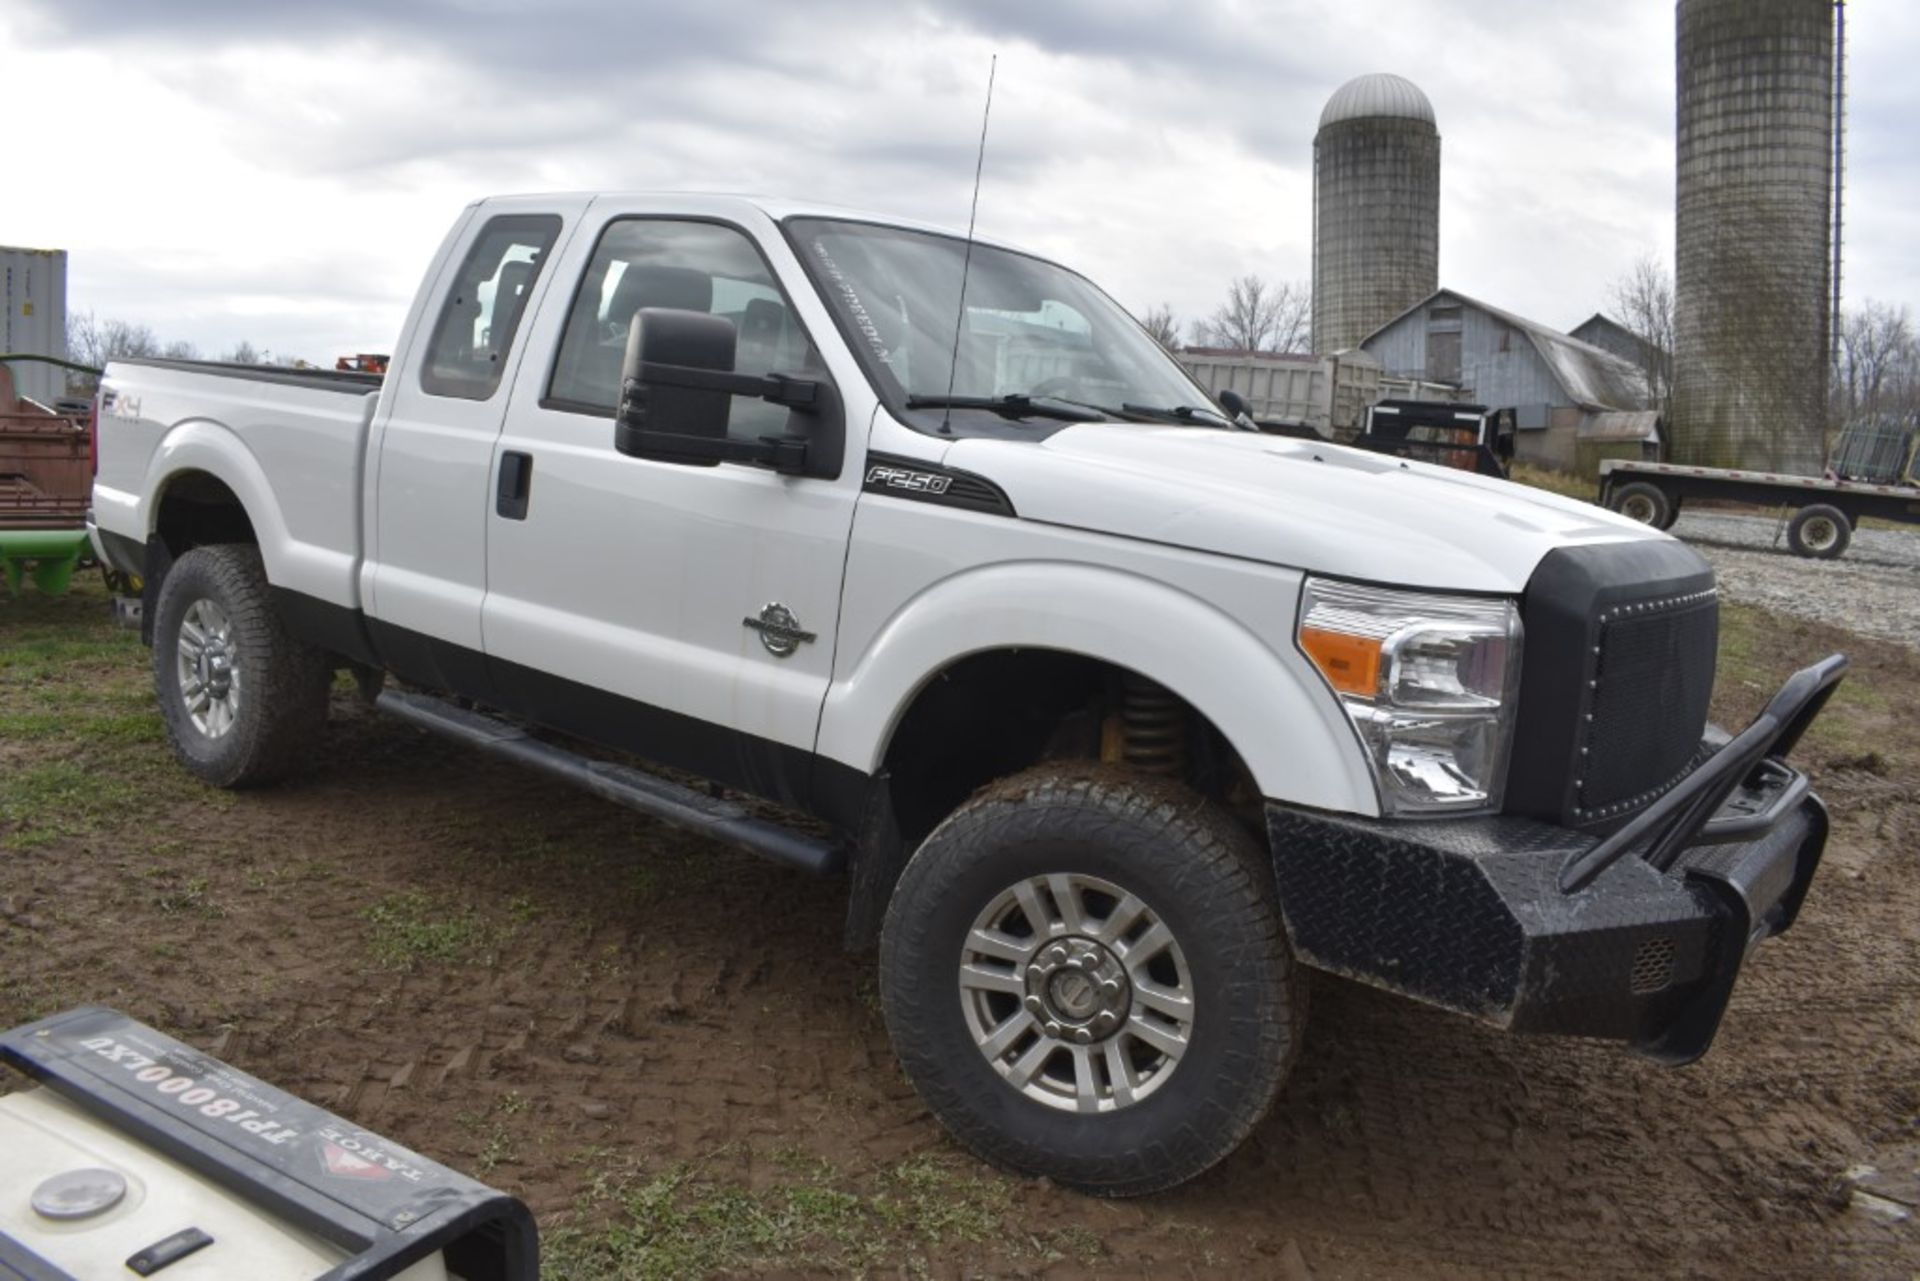 2011 Ford F-250 Super Duty Truck - Image 2 of 40